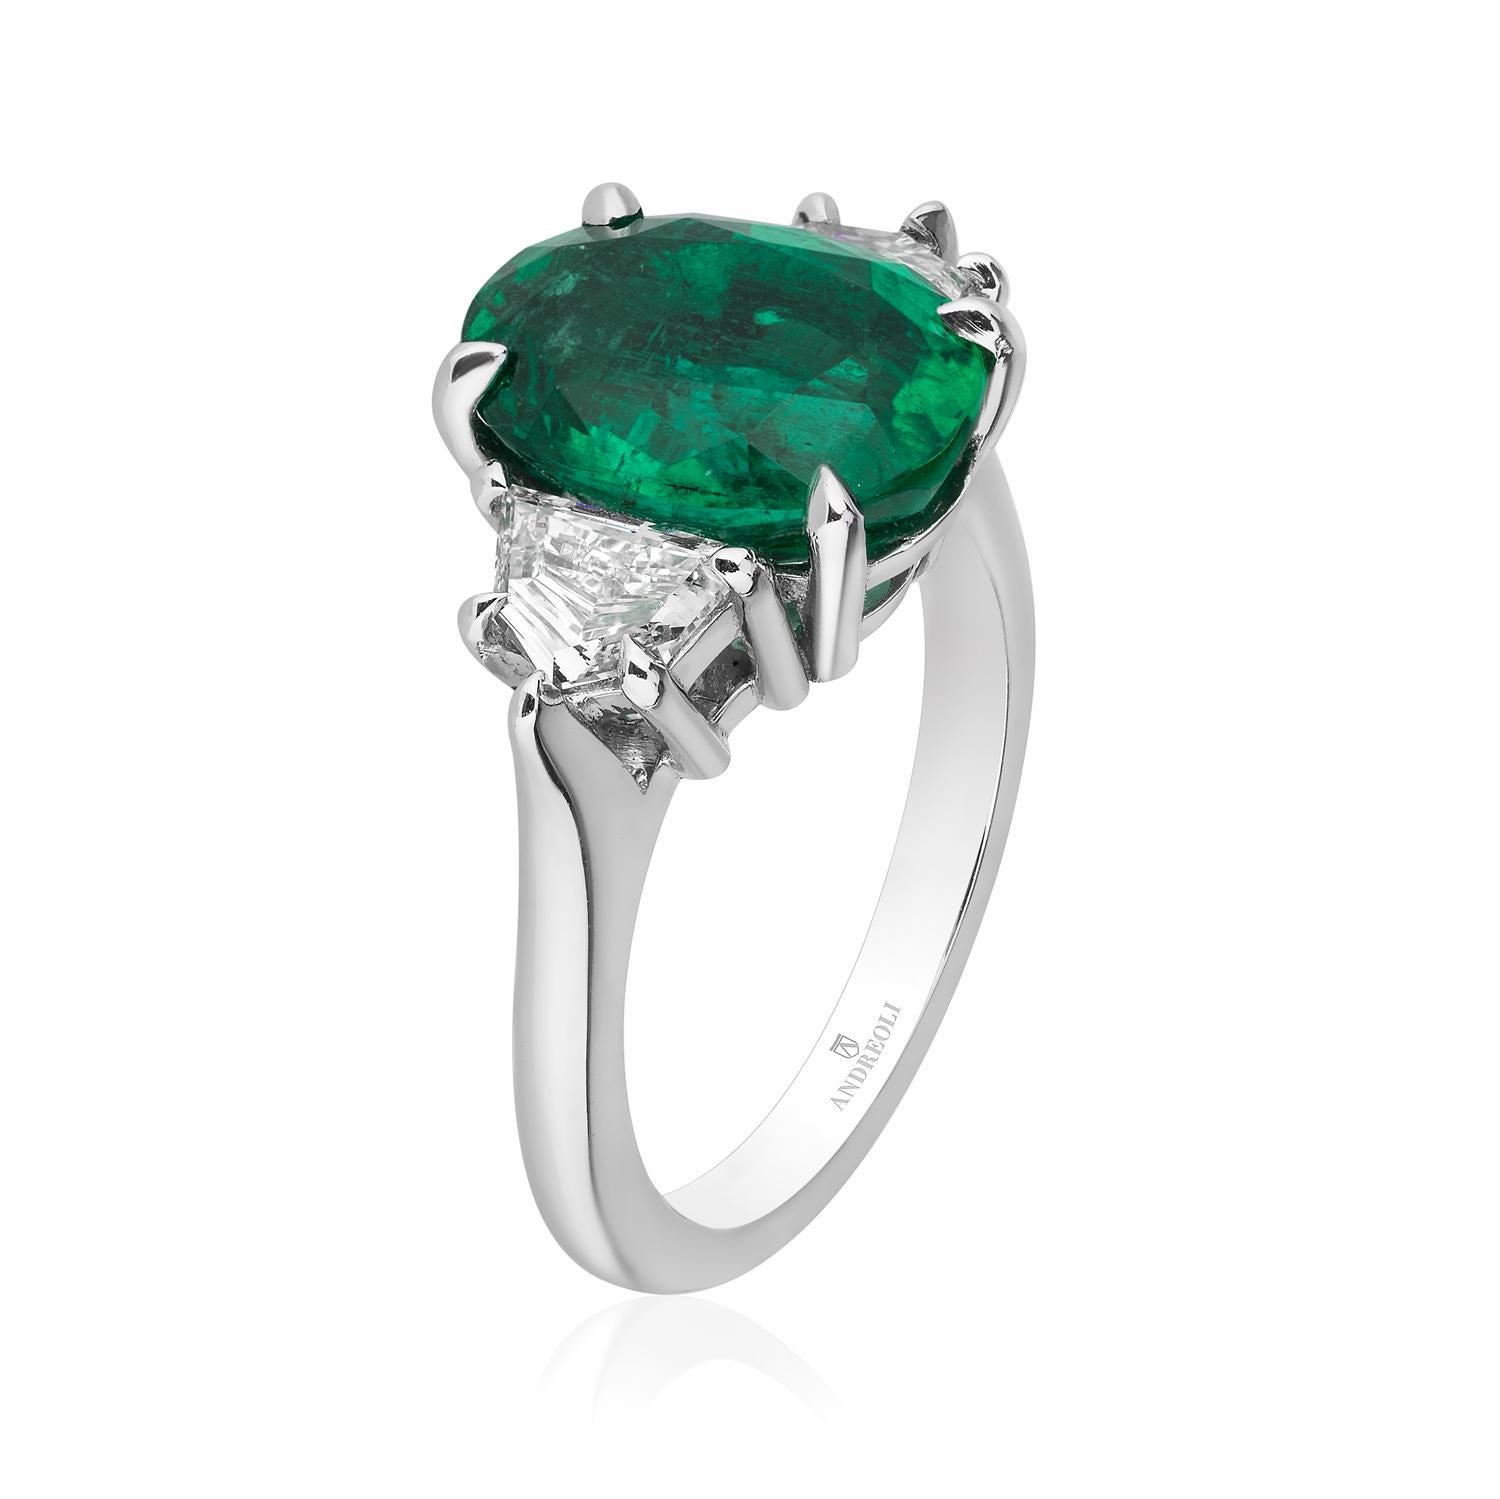 Oval Emerald Engagement Ring with Diamond Side Stones Platinum Andreoli

This Andreoli Engagement ring features a 4.38 carat oval emerald certified by CDC Switzerland Gemology Lab as a vivid green emerald with an origin from Zambia.

Flanked by two